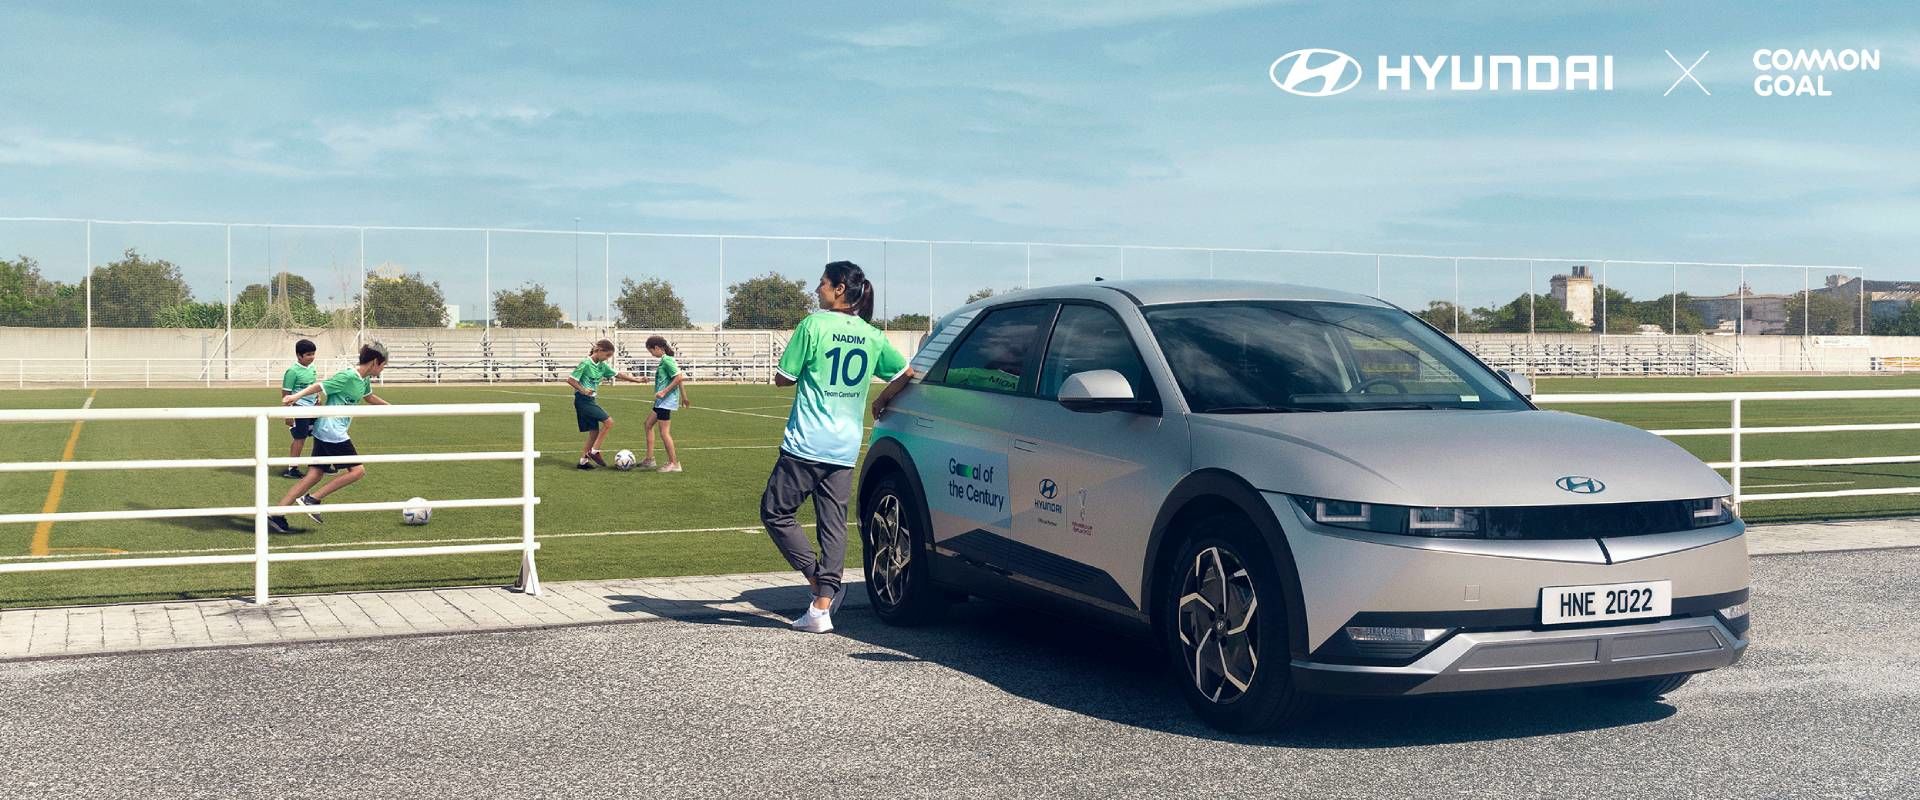 Hyundai Motor and Common Goal Team Up for Sustainability